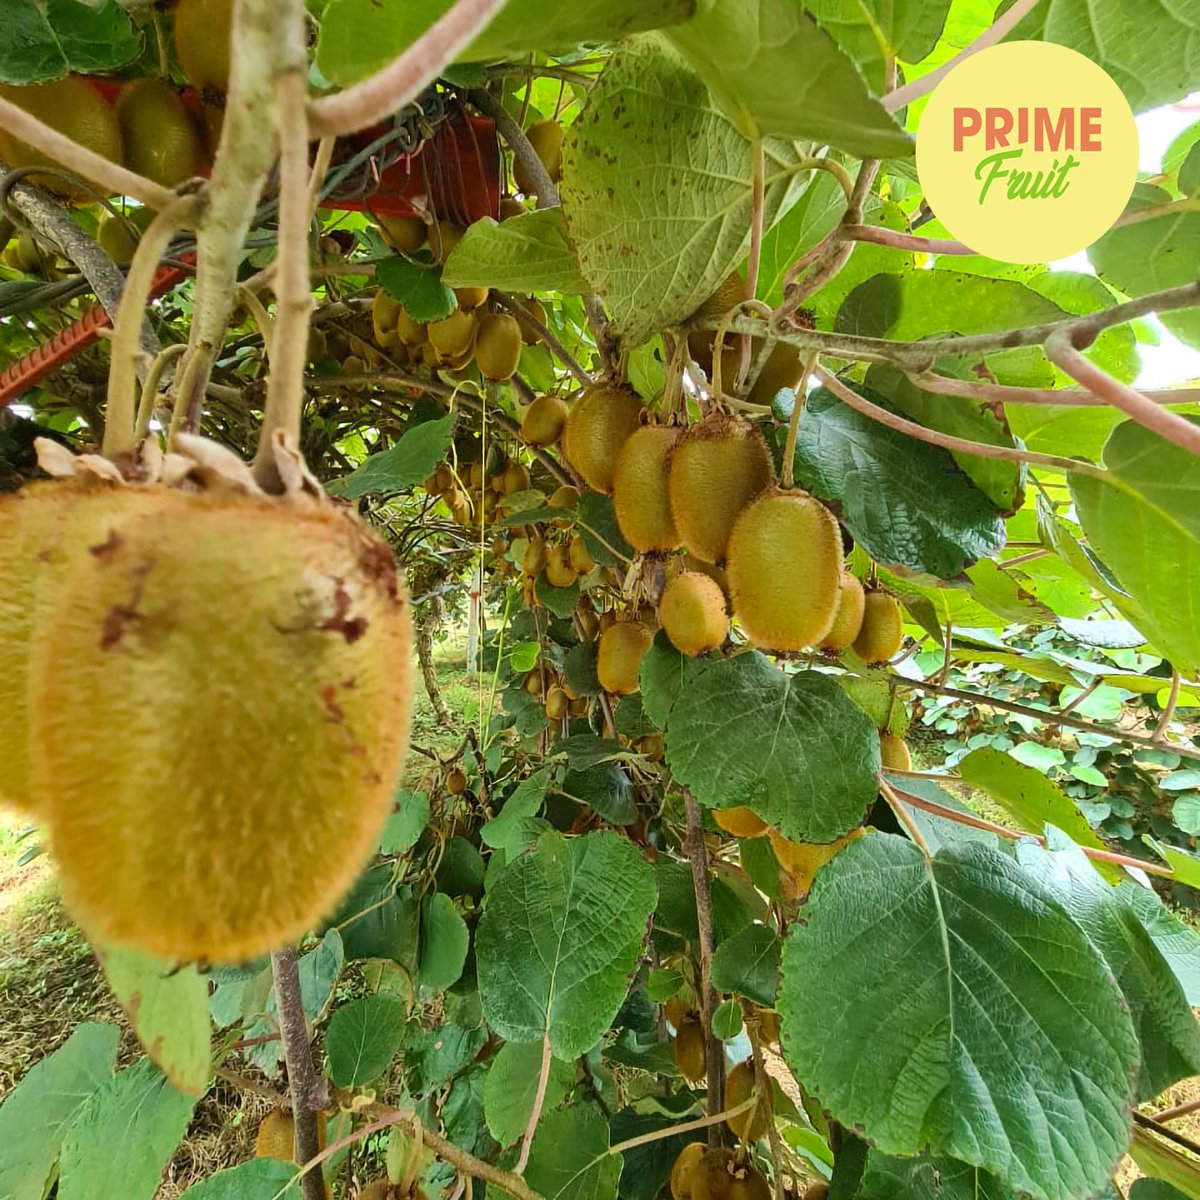 Did you know that #kiwifruit is considered as a REAL SUPERFOOD? 🥝🥝🥝
And it’s backed by Science! 😮
A kiwifruit has almost double the amount of vitamin C than an orange! 

#dxblife #UAE
#mydubailife #dxblife🇦🇪 #DubaiLife #dxb
#FruitDeliveryDubai #DubaiFruitDelivery #mydubai🇦🇪